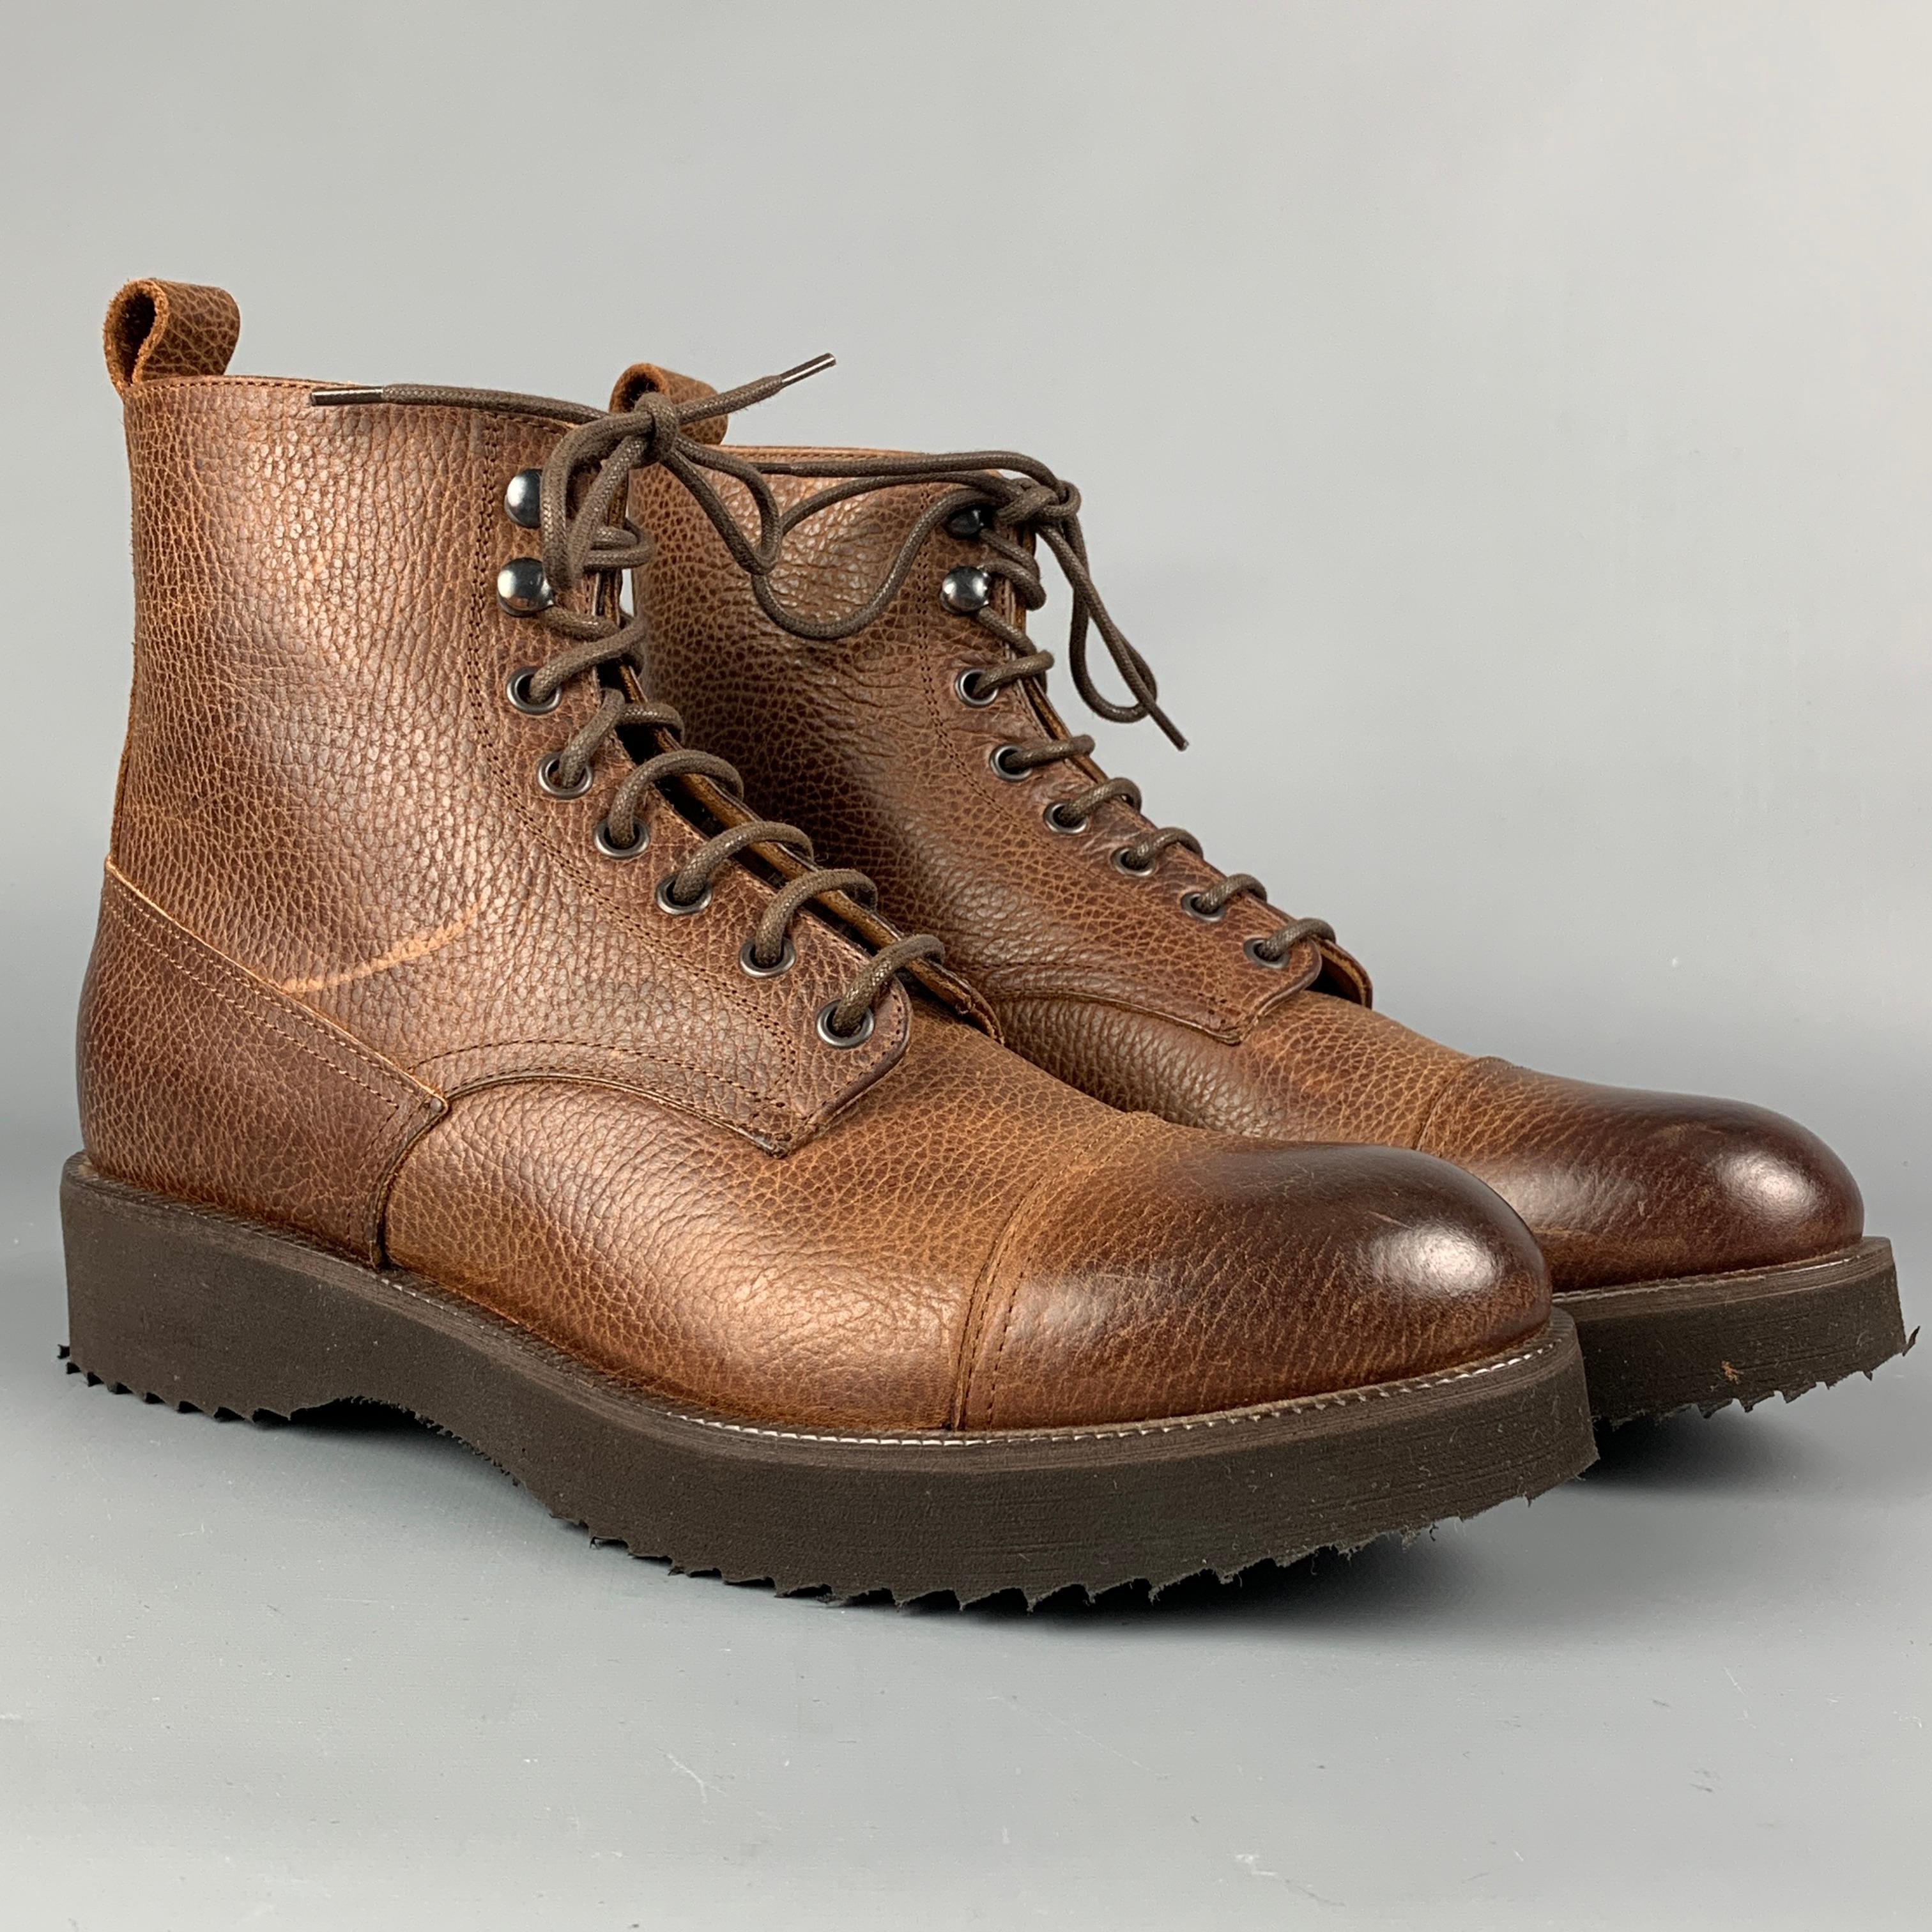 BARNEY'S NEW YORK boots comes in a brown antique leather featuring a cap te, rubber sole, and a lace up closure. 

New With Box.
Marked: 8 M

Measurements:

Length: 11.5 in.
Width: 4 in.
Height: 5.5 in. 